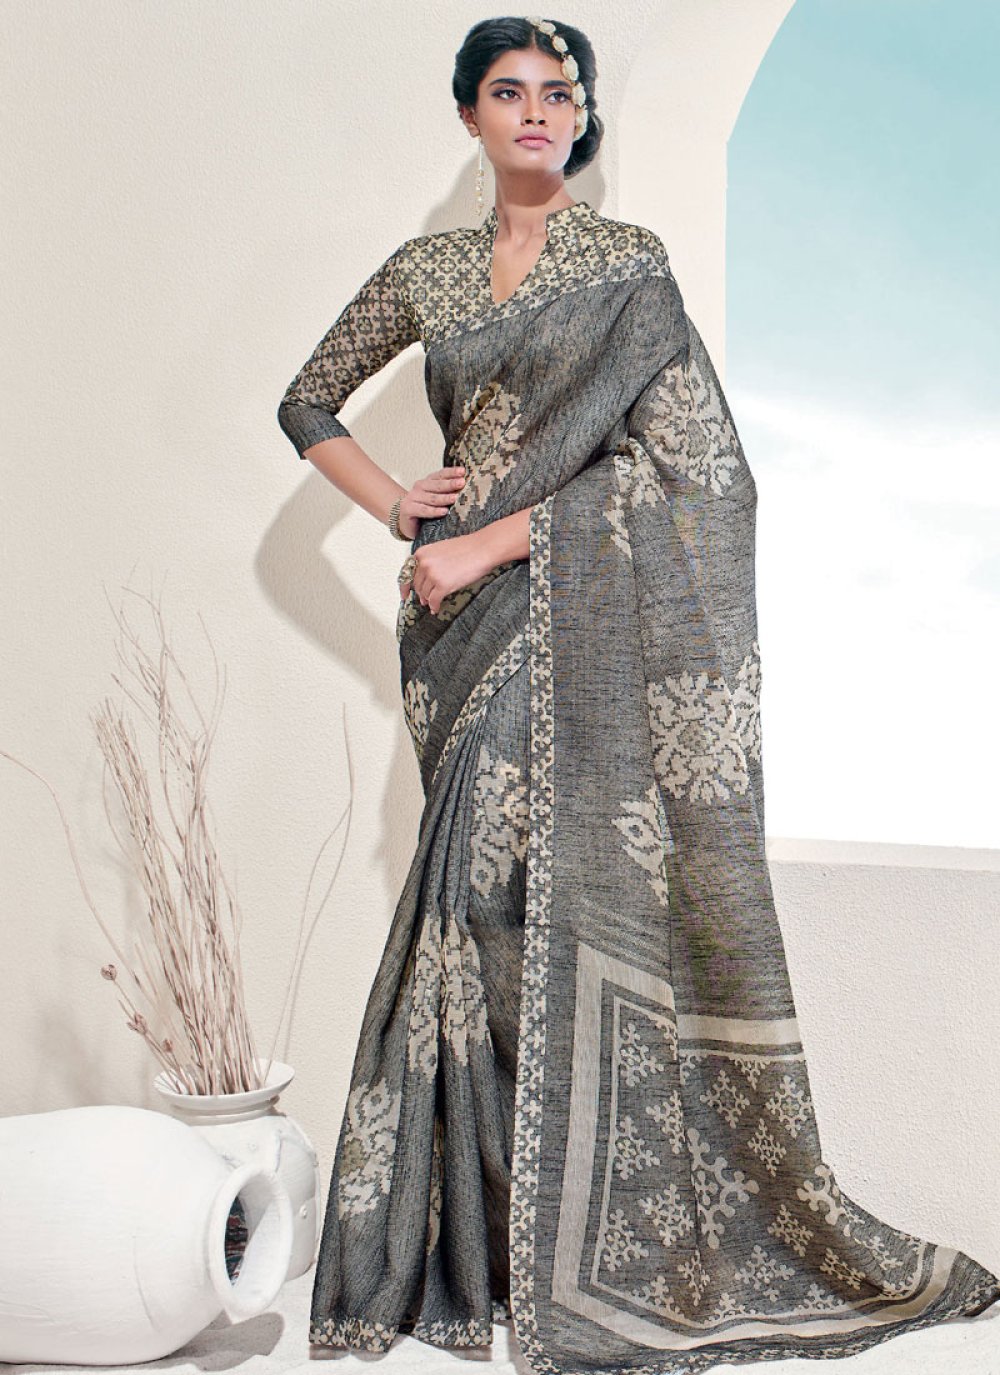 Faux Georgette Party Wear Saree in Silver with Lace work | Party wear sarees,  Party wear, How to wear